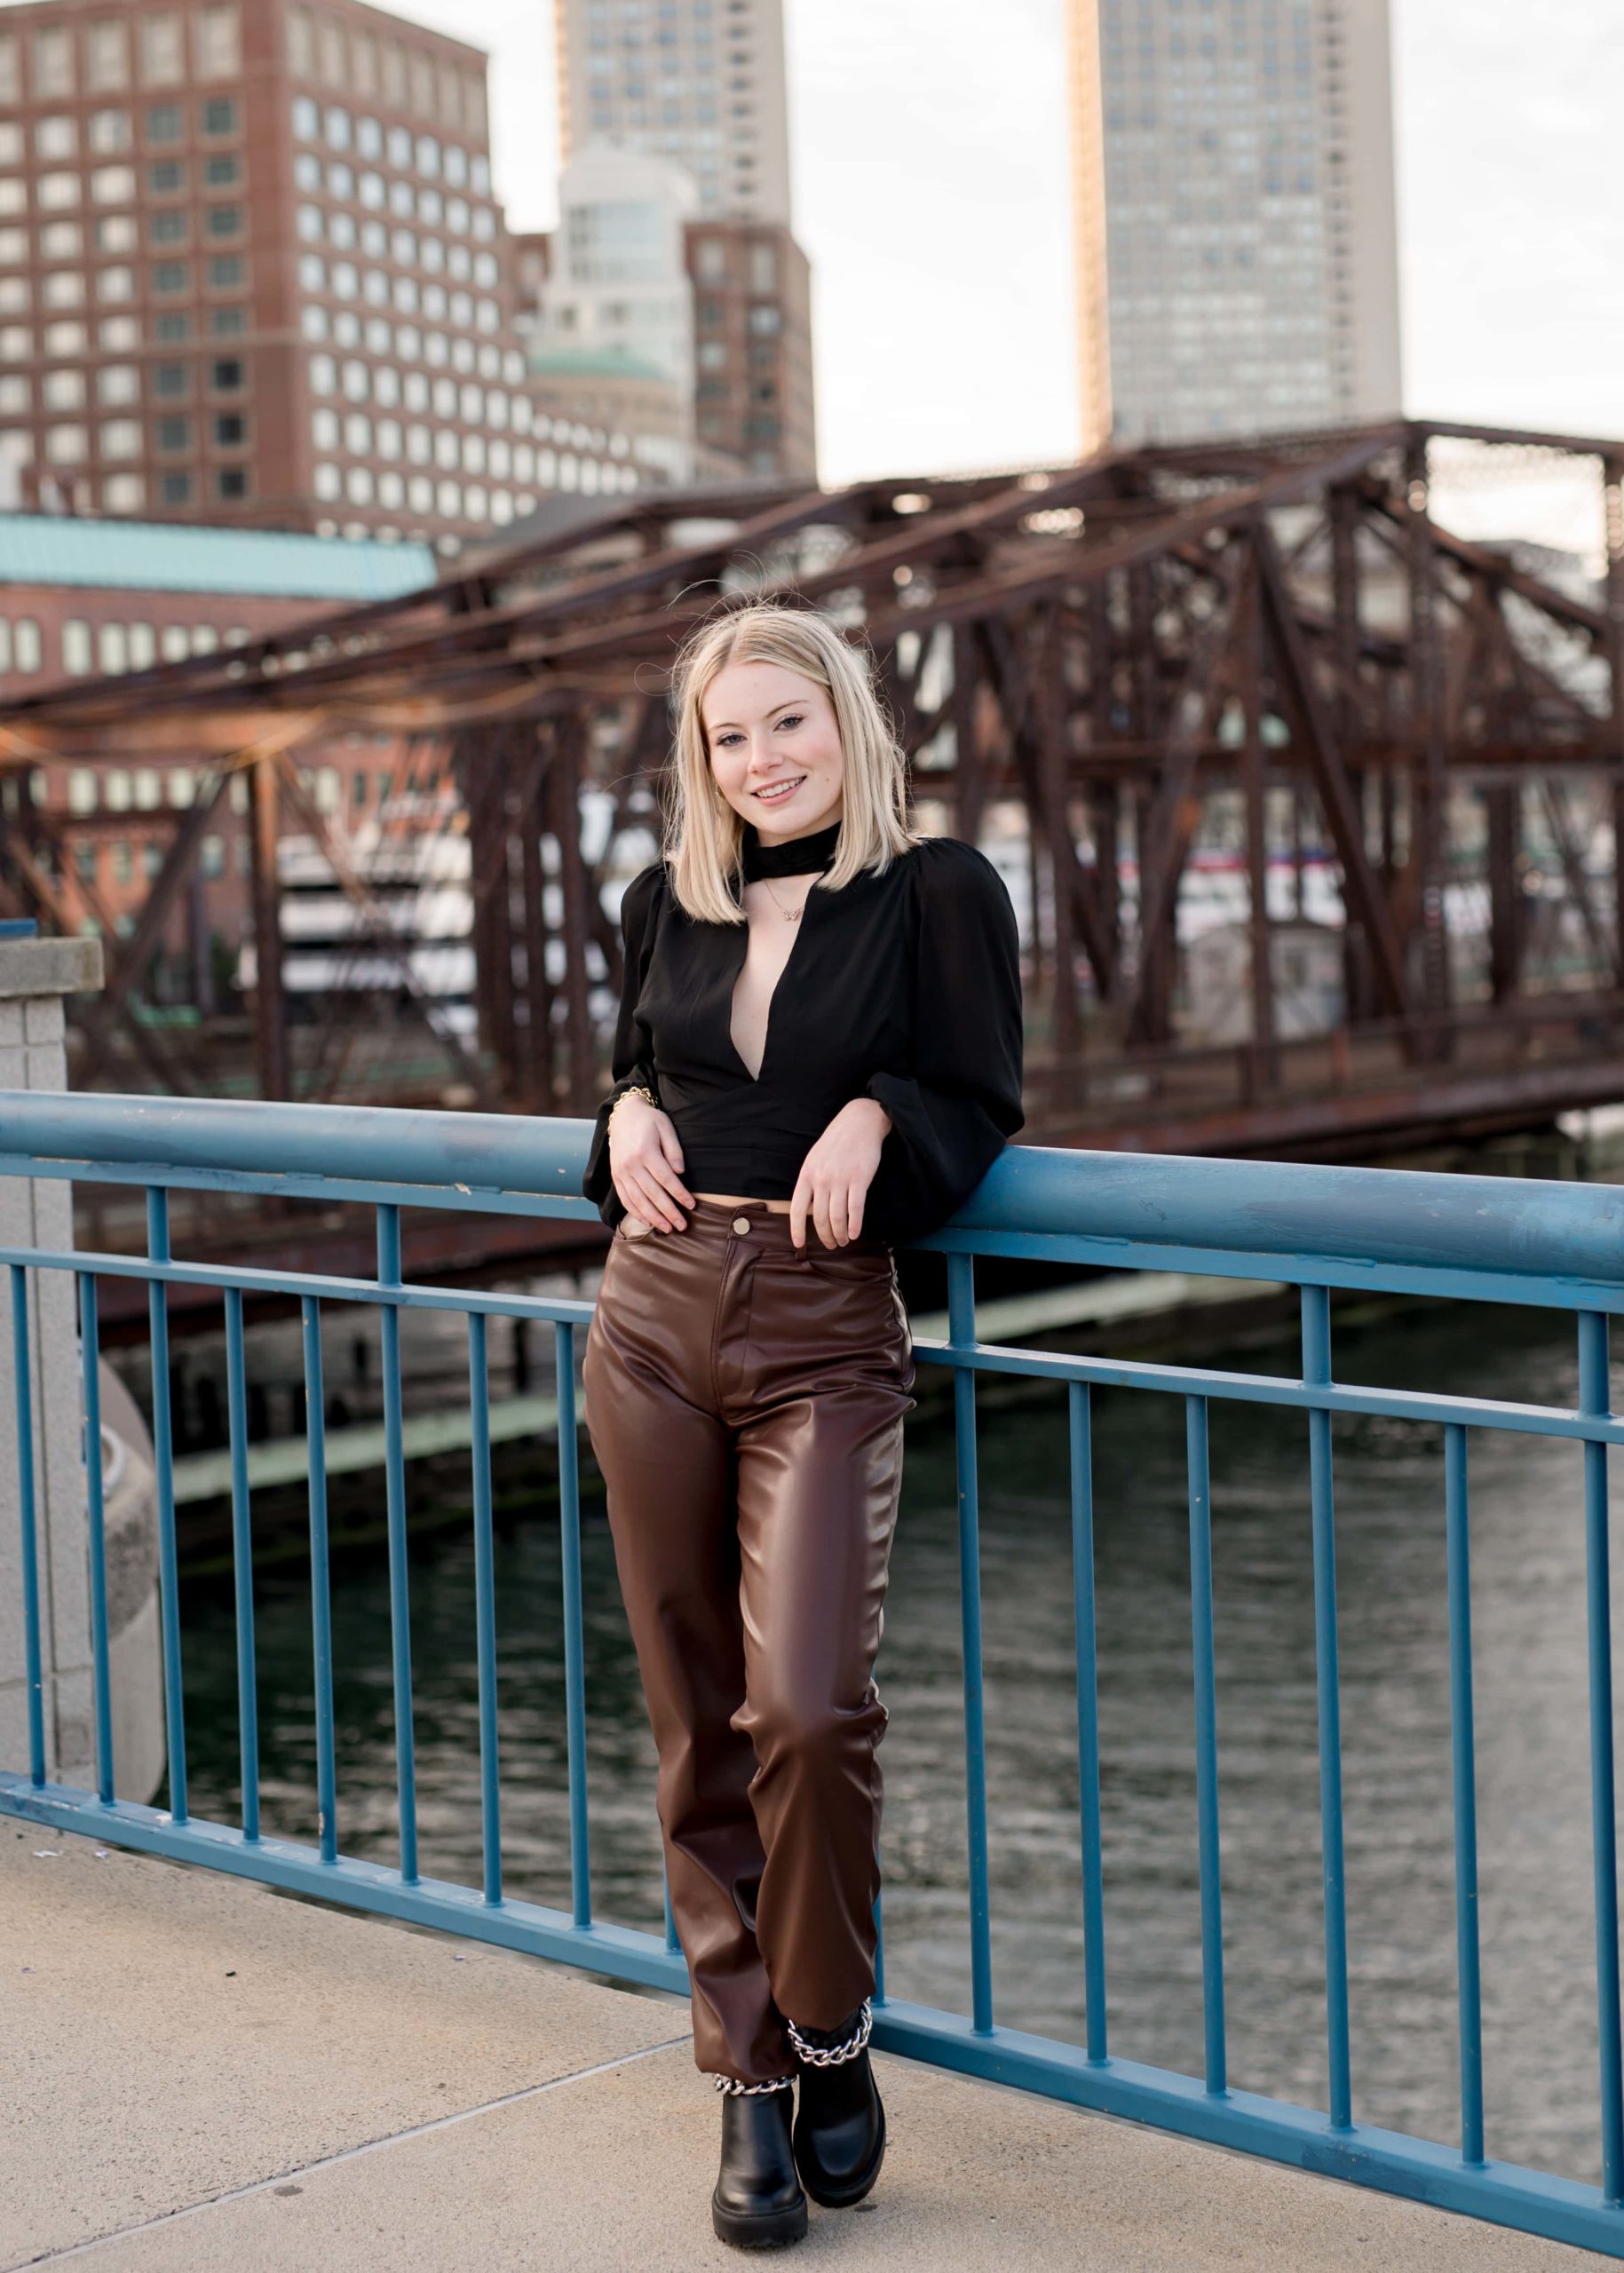 Senior pictures in front of the bridge in Seaport